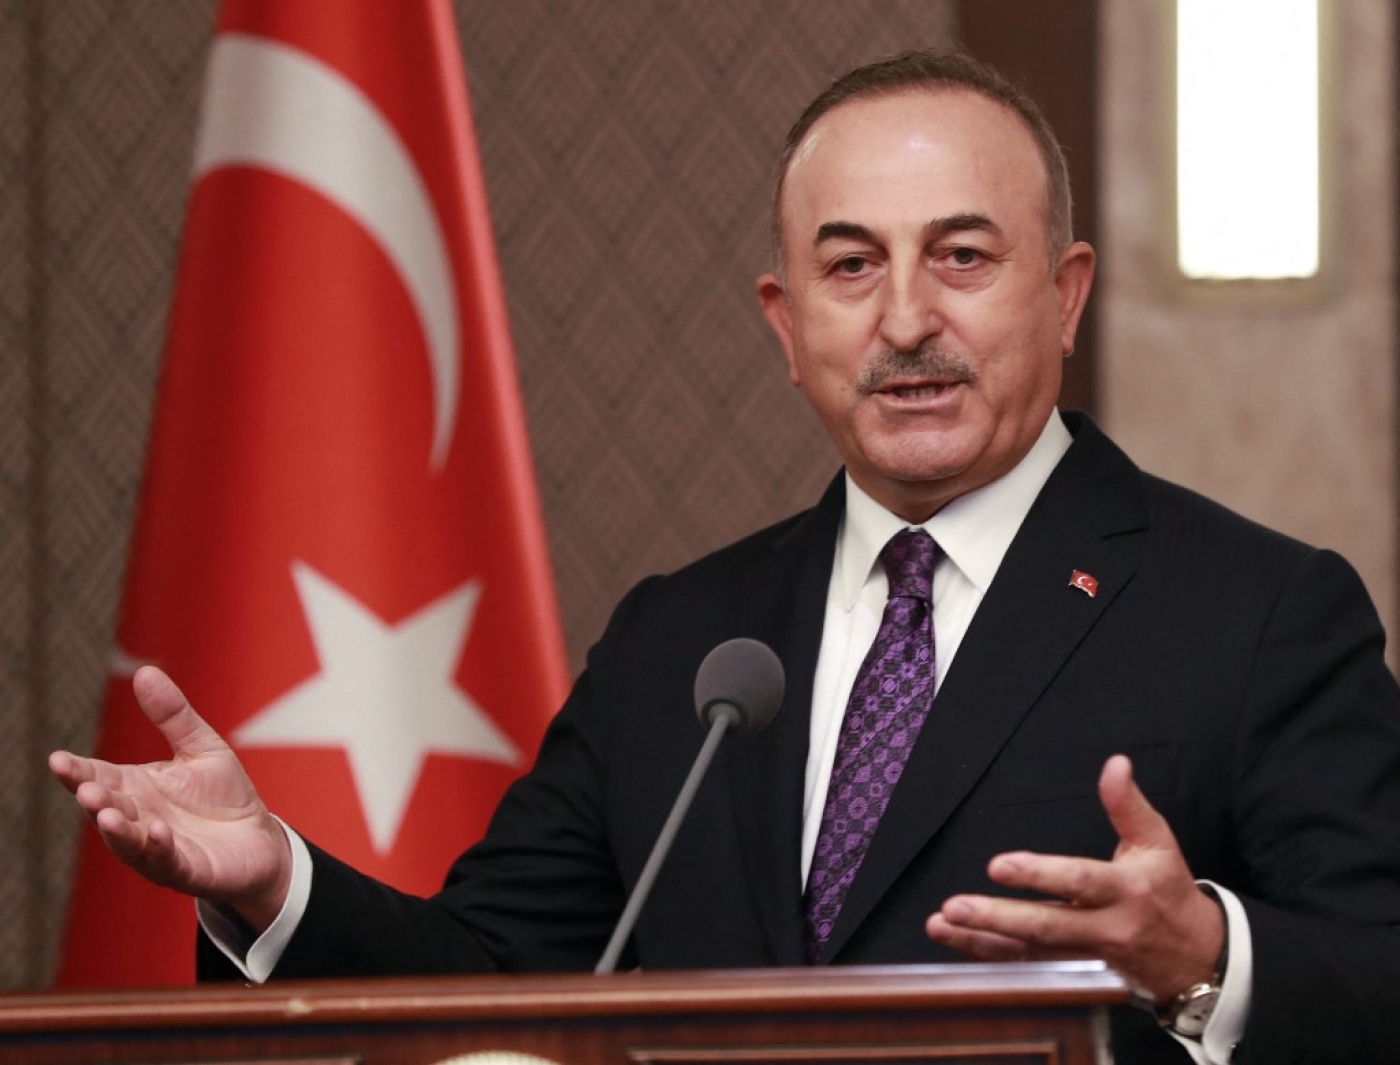 Cavusoglu also said last week that Turkey was due to send a diplomatic delegation to Cairo for the first time since the coup.